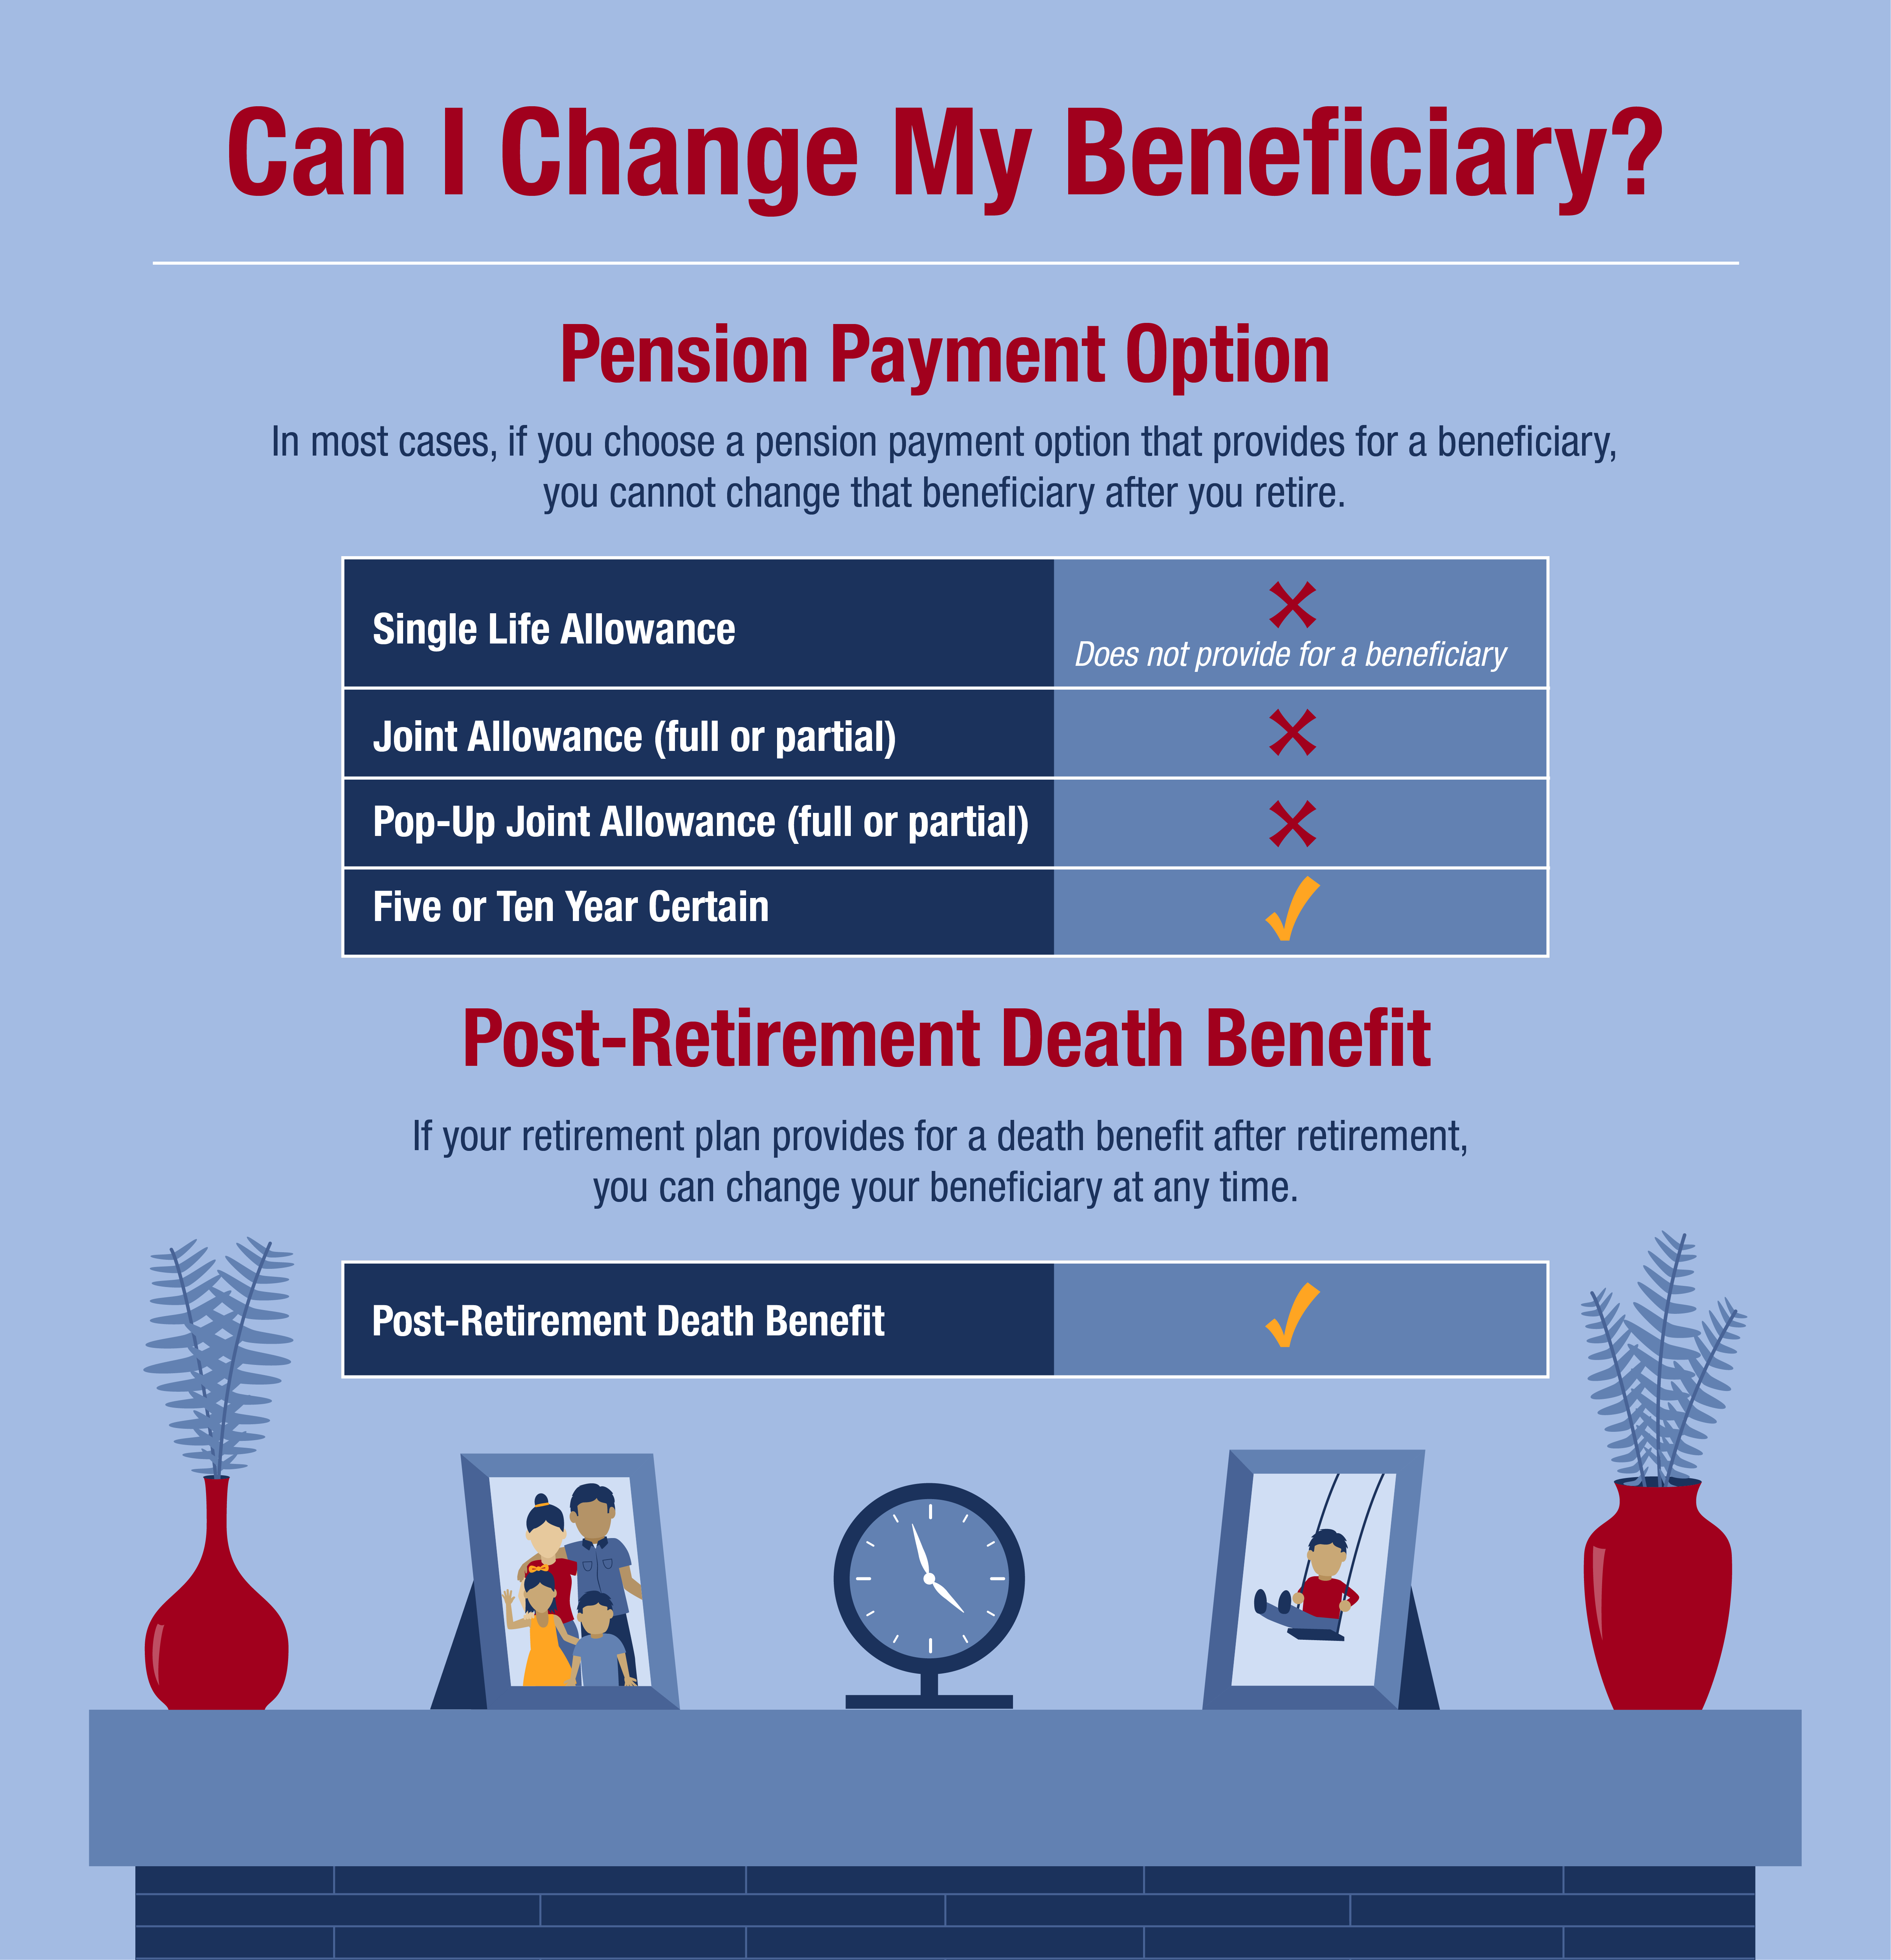 Can you change your beneficiary?